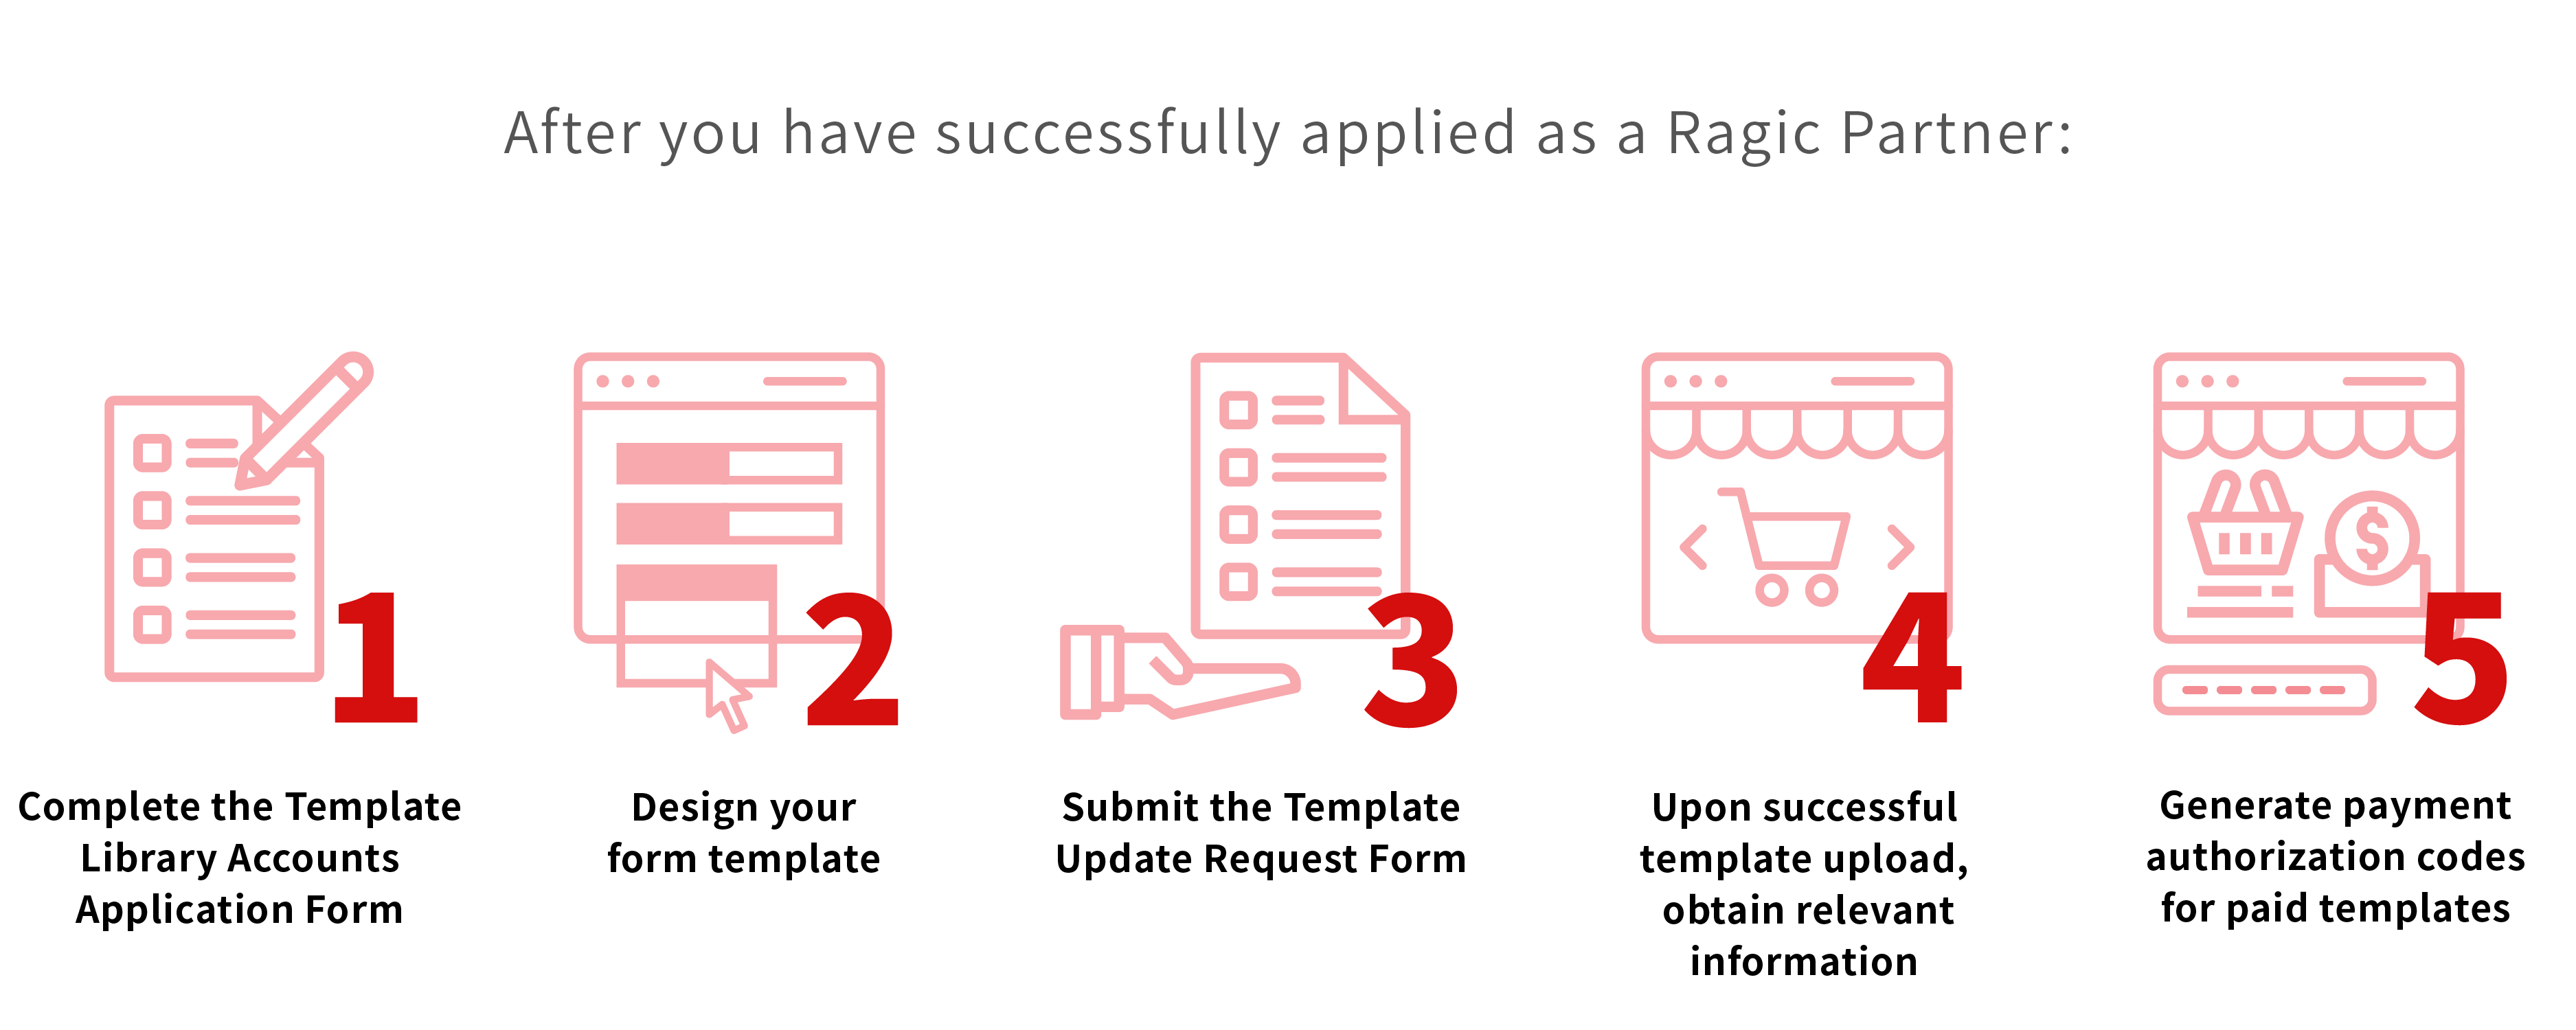 After you have successfully applied as a Ragic Partner:；1. Complete the Template Library Accounts Application Form
2. Design your form template
3. Submit the Template Update Request Form
4. Upon successful template upload, obtain relevant information
5. Generate payment authorization codes for paid templates